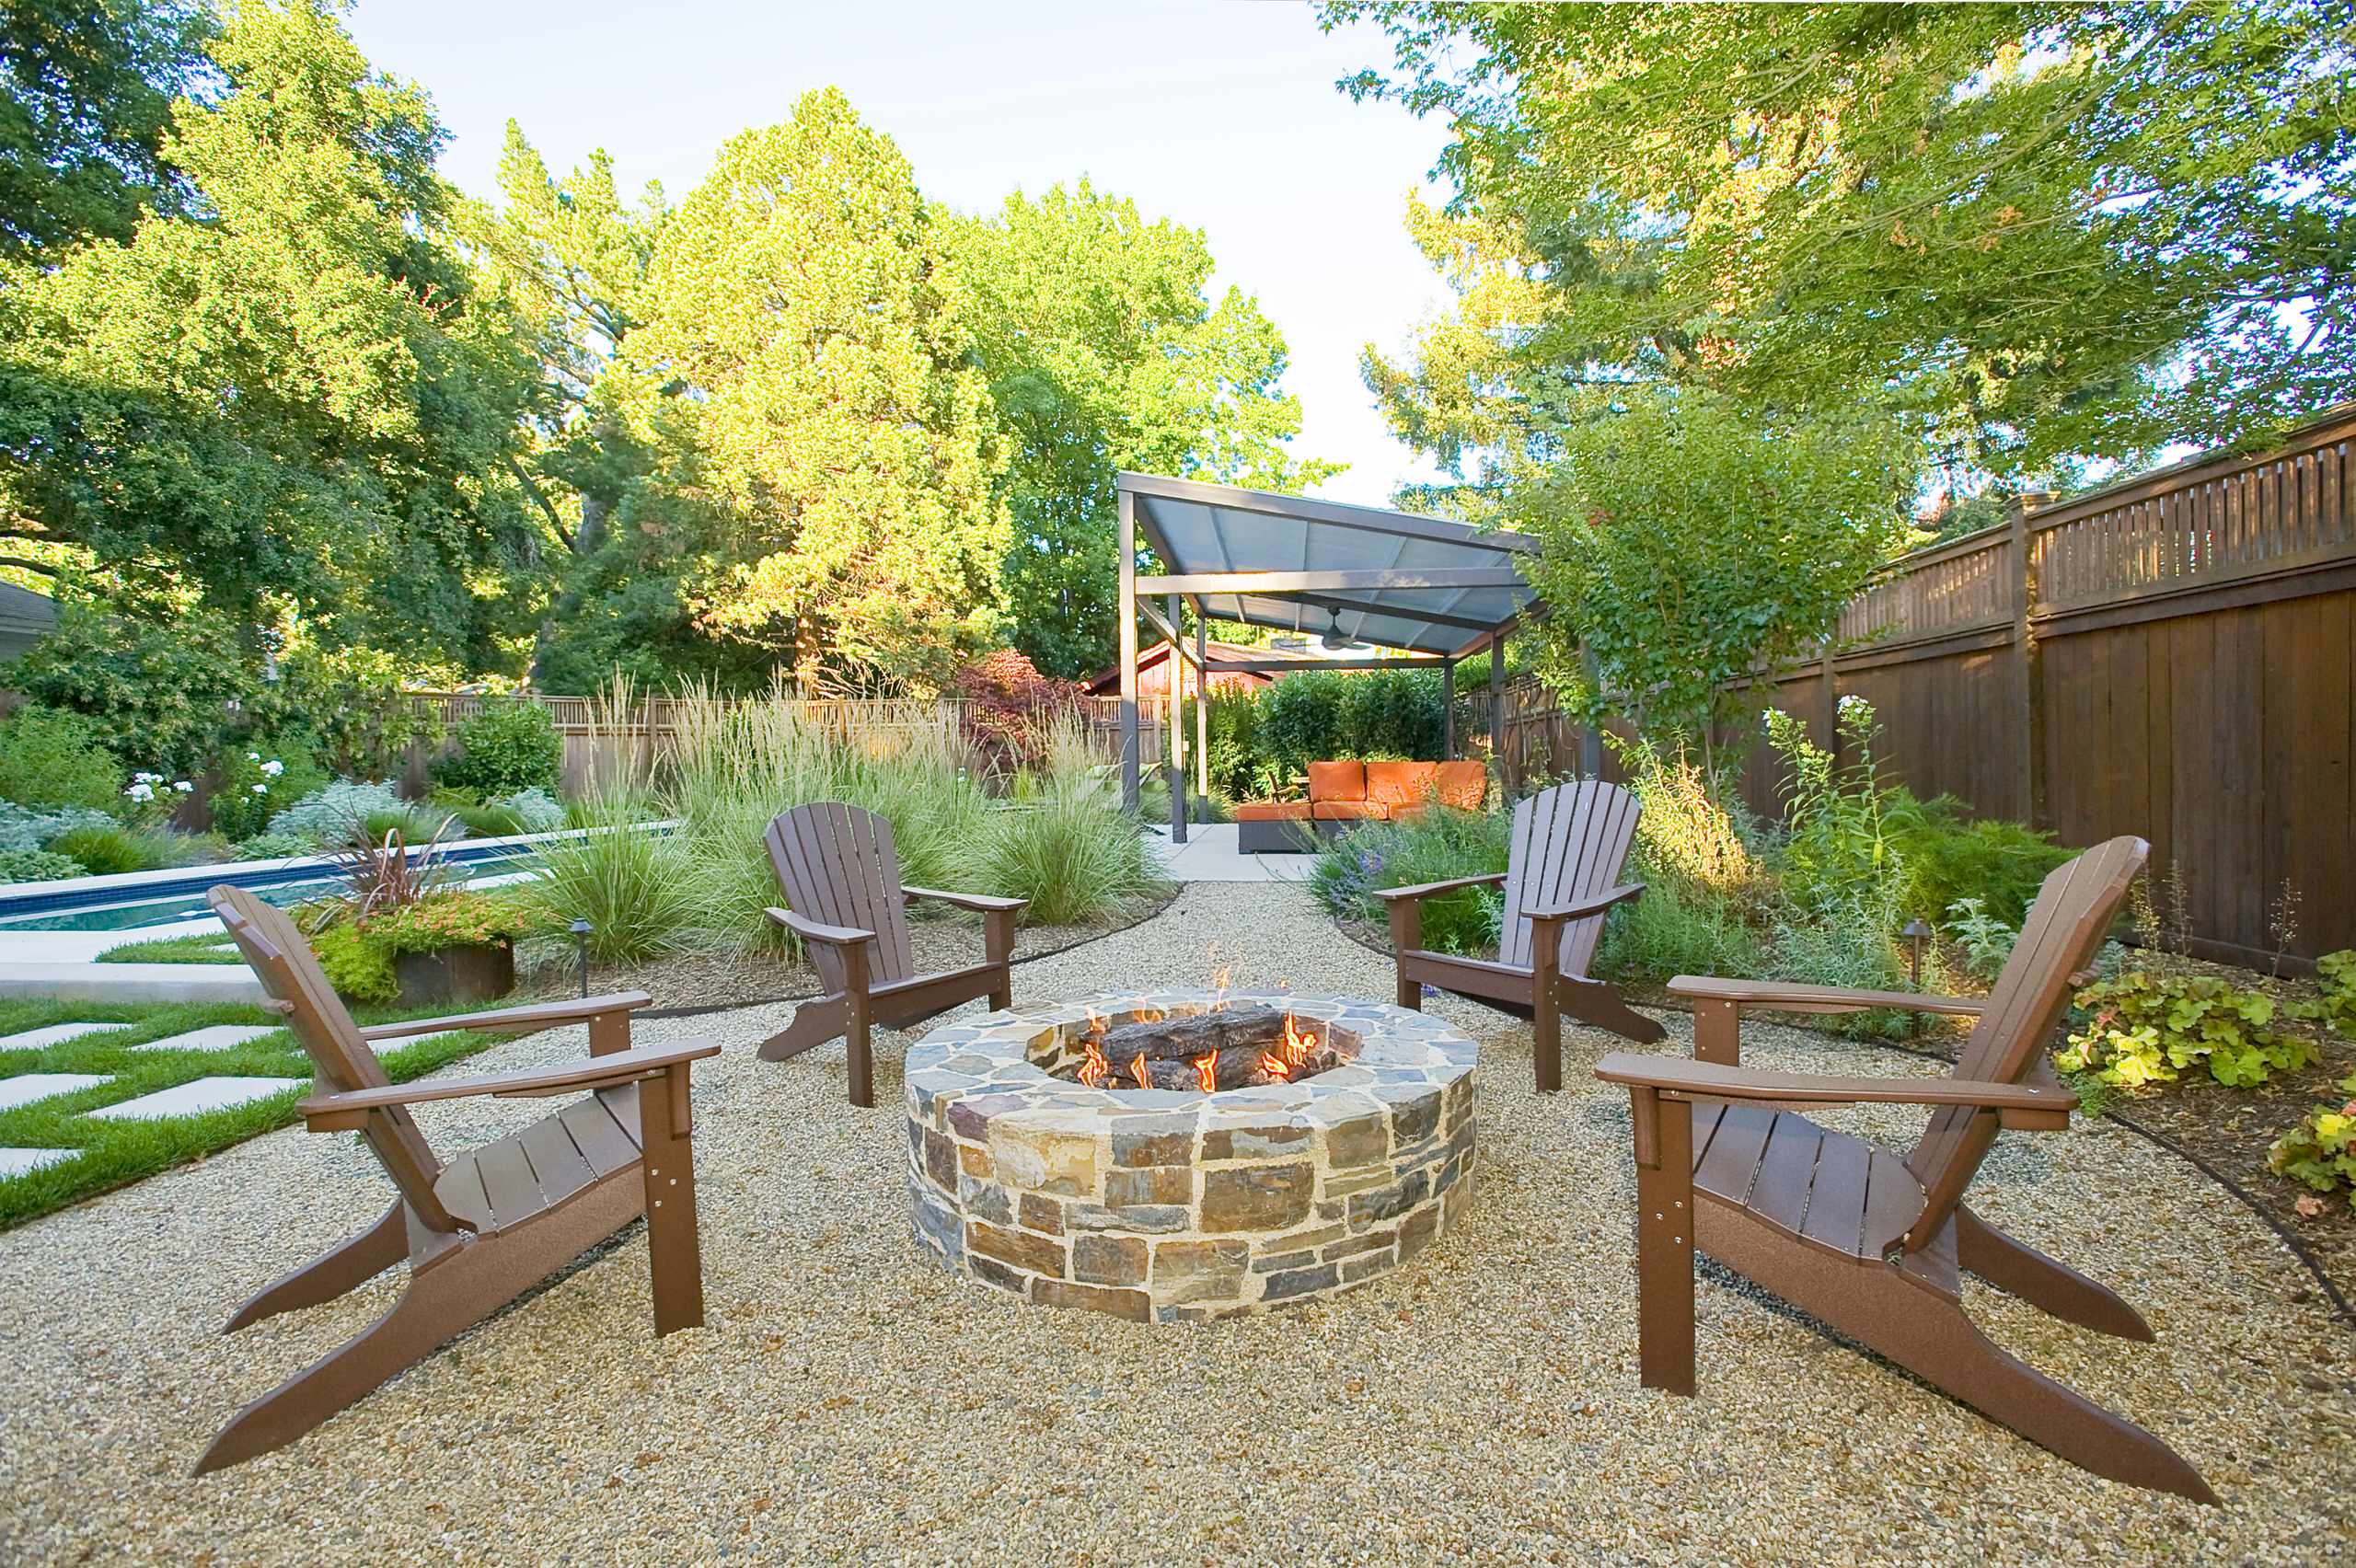 Pea Gravel Patio: 15 Pros and Cons to Consider Before Installation